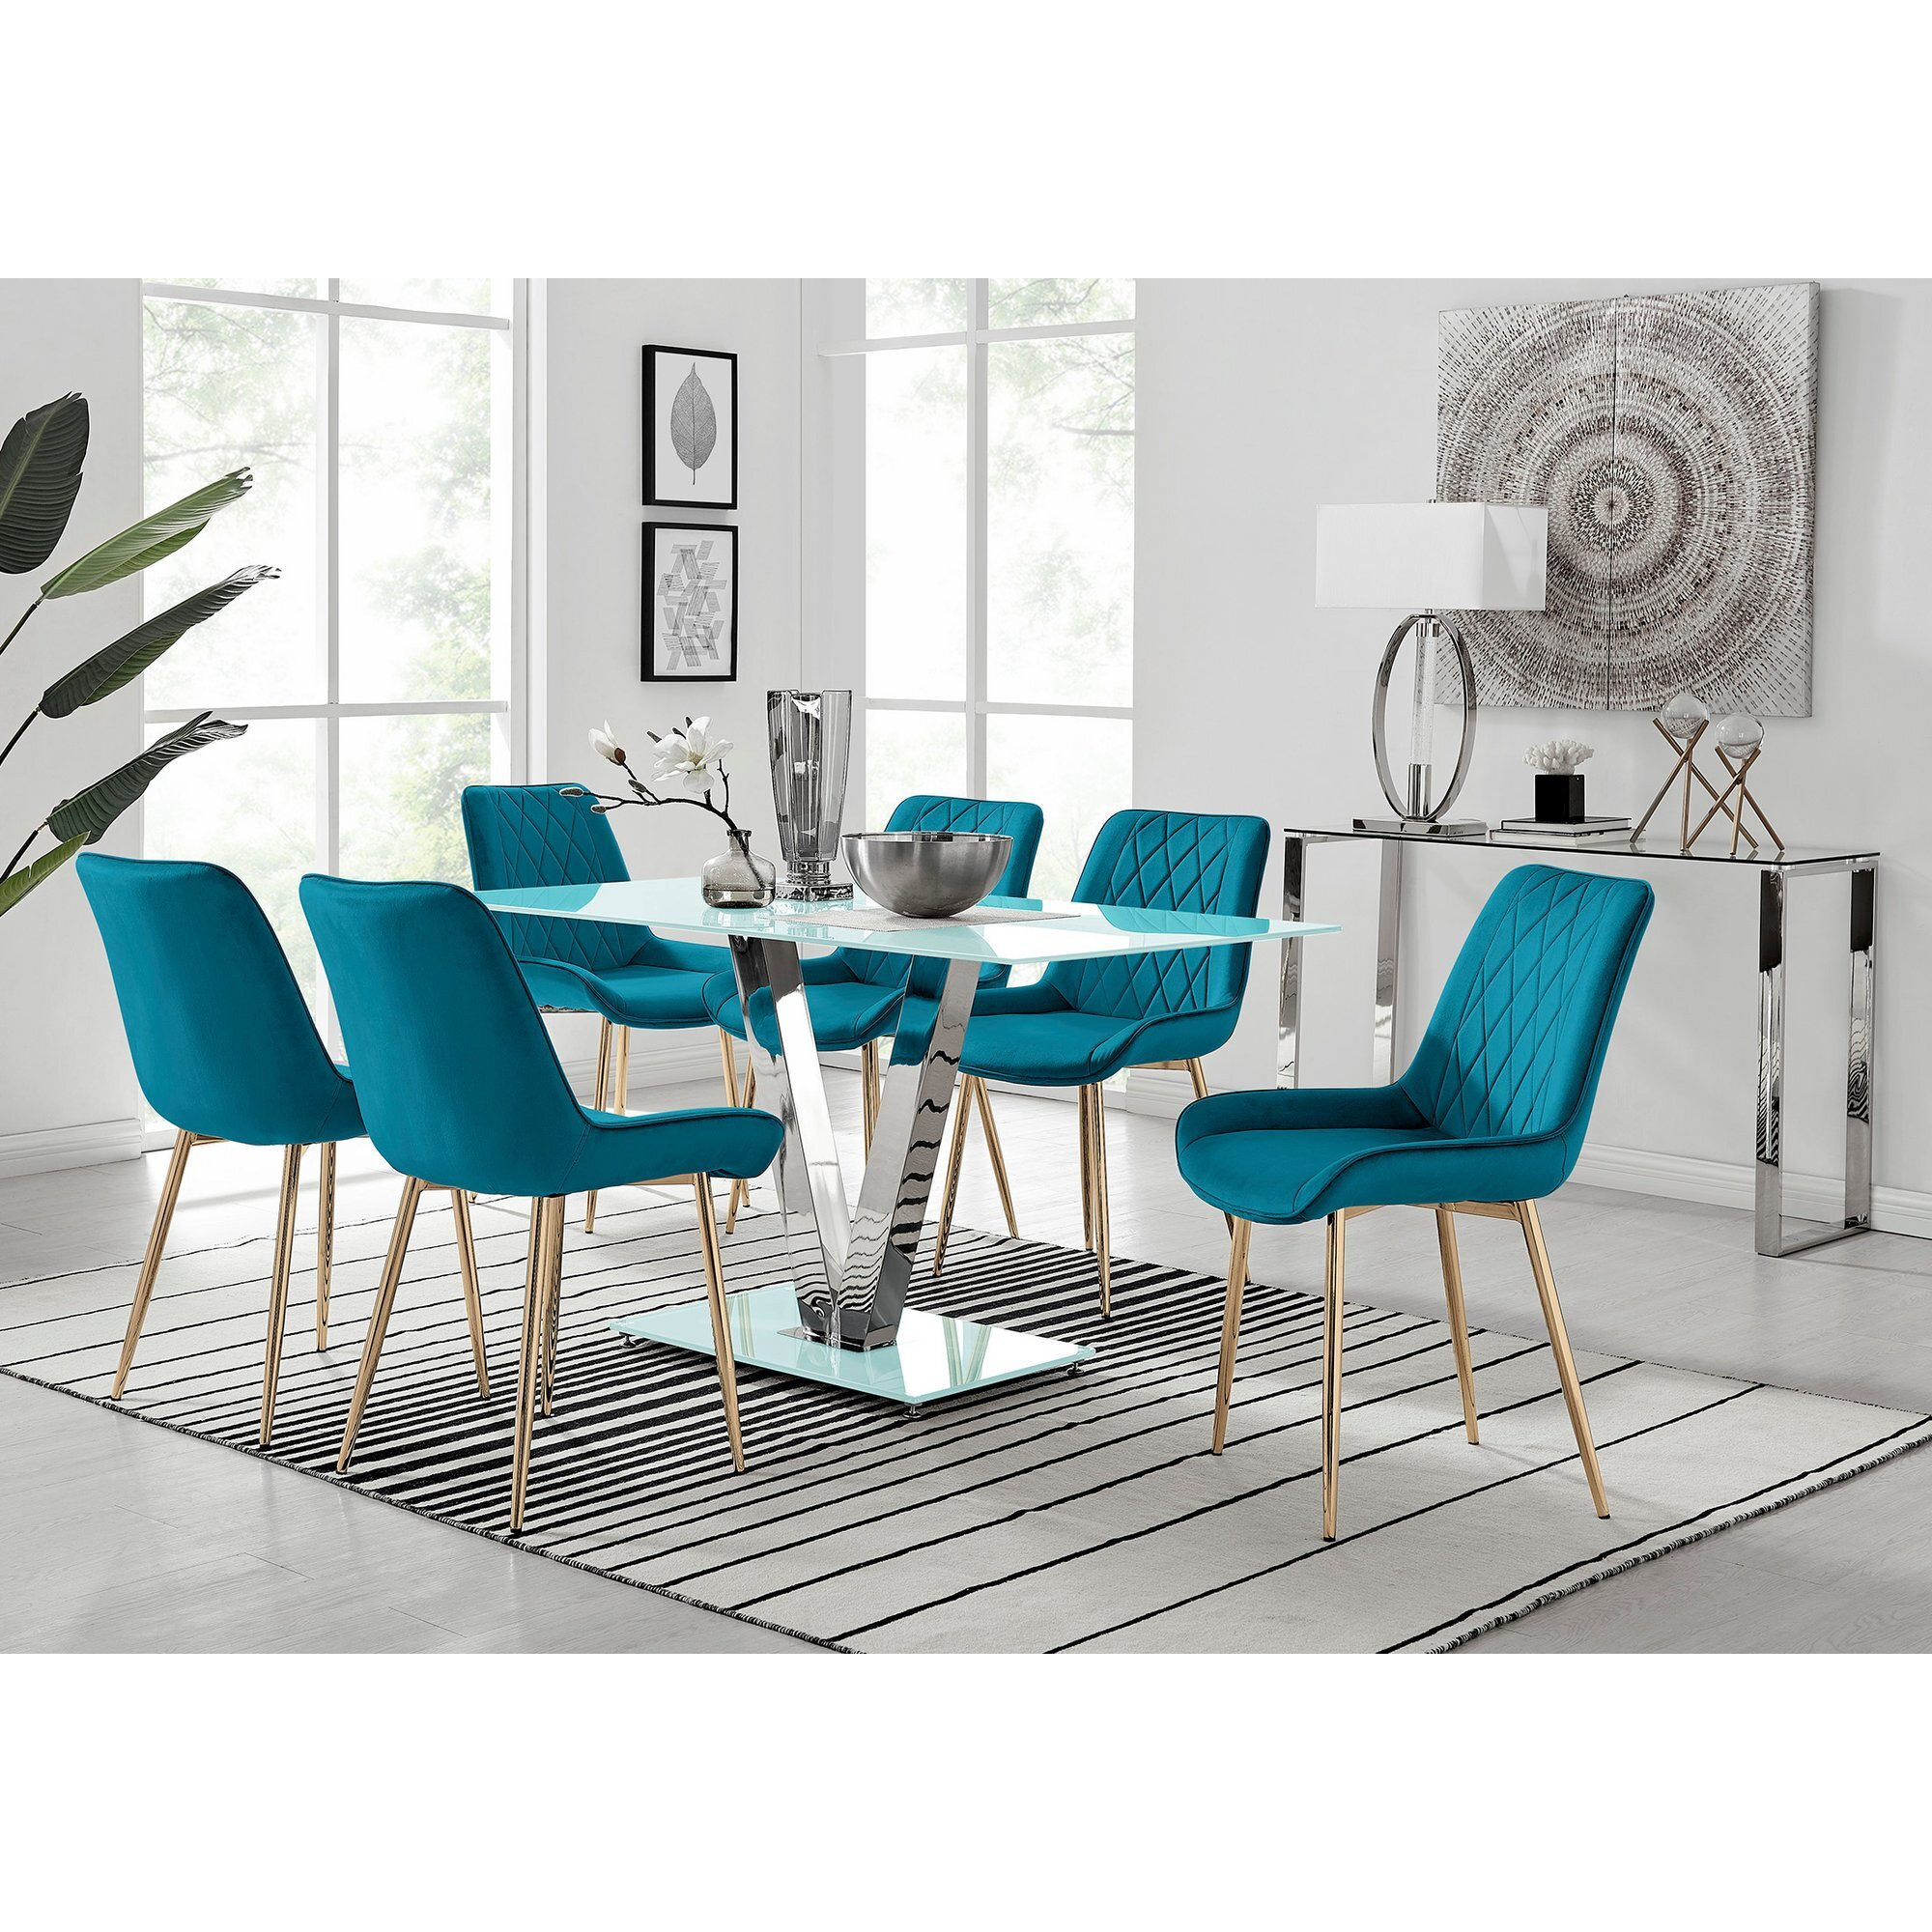 Florini V White Dining Table and 6 Pesaro Gold Leg Chairs